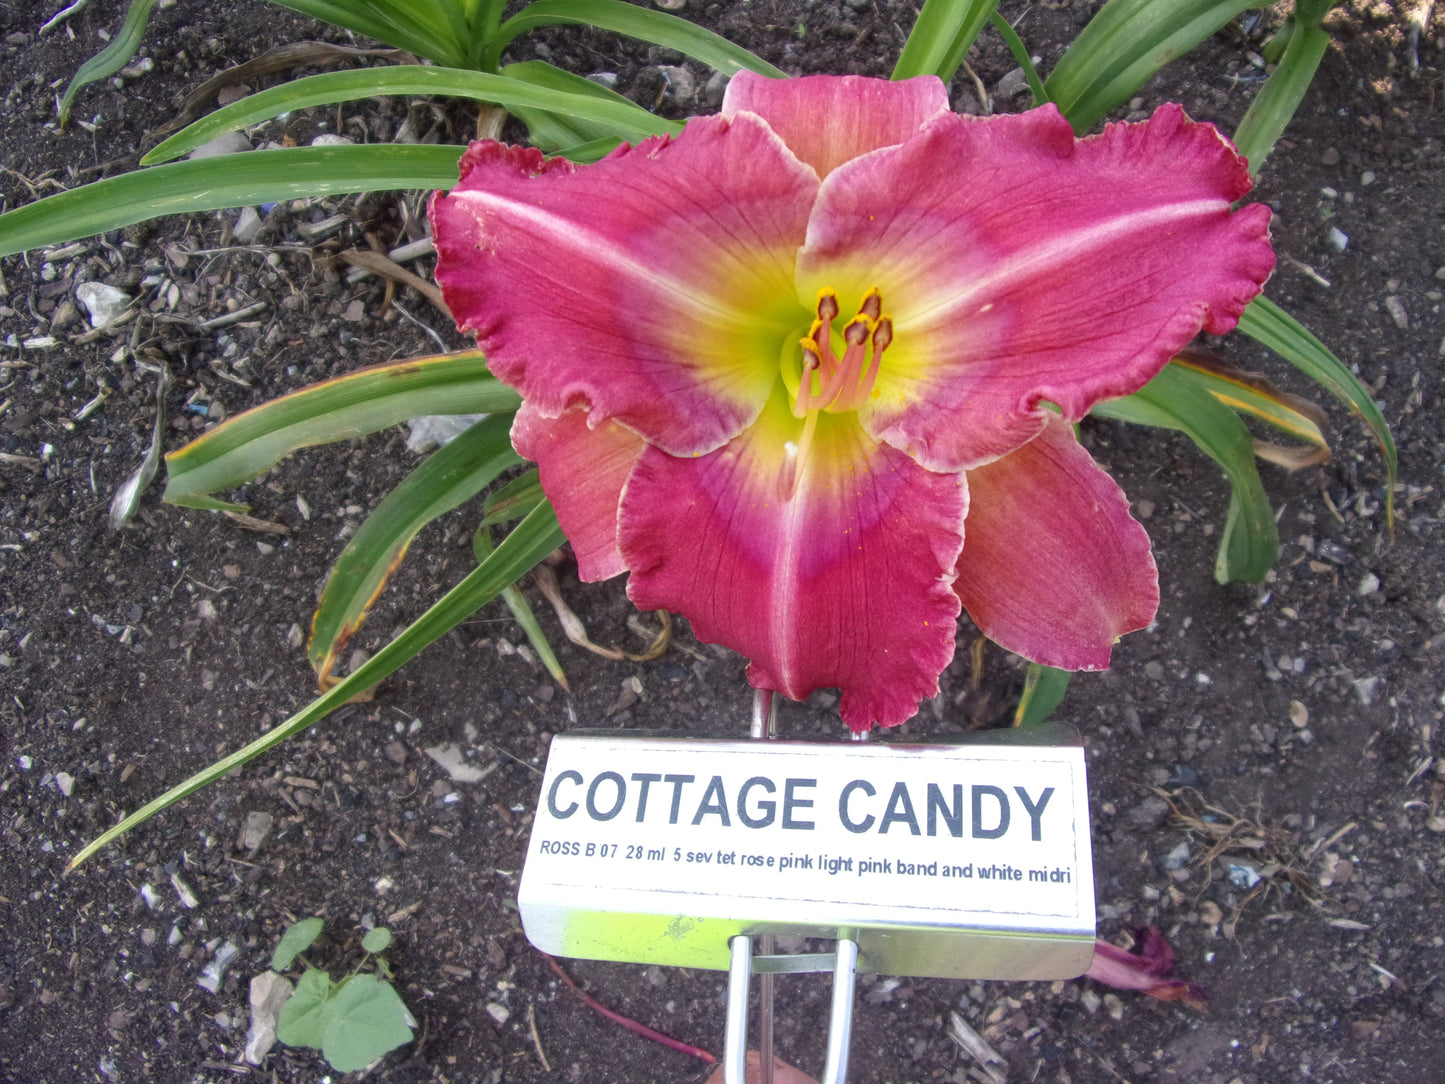 COTTAGE CANDY